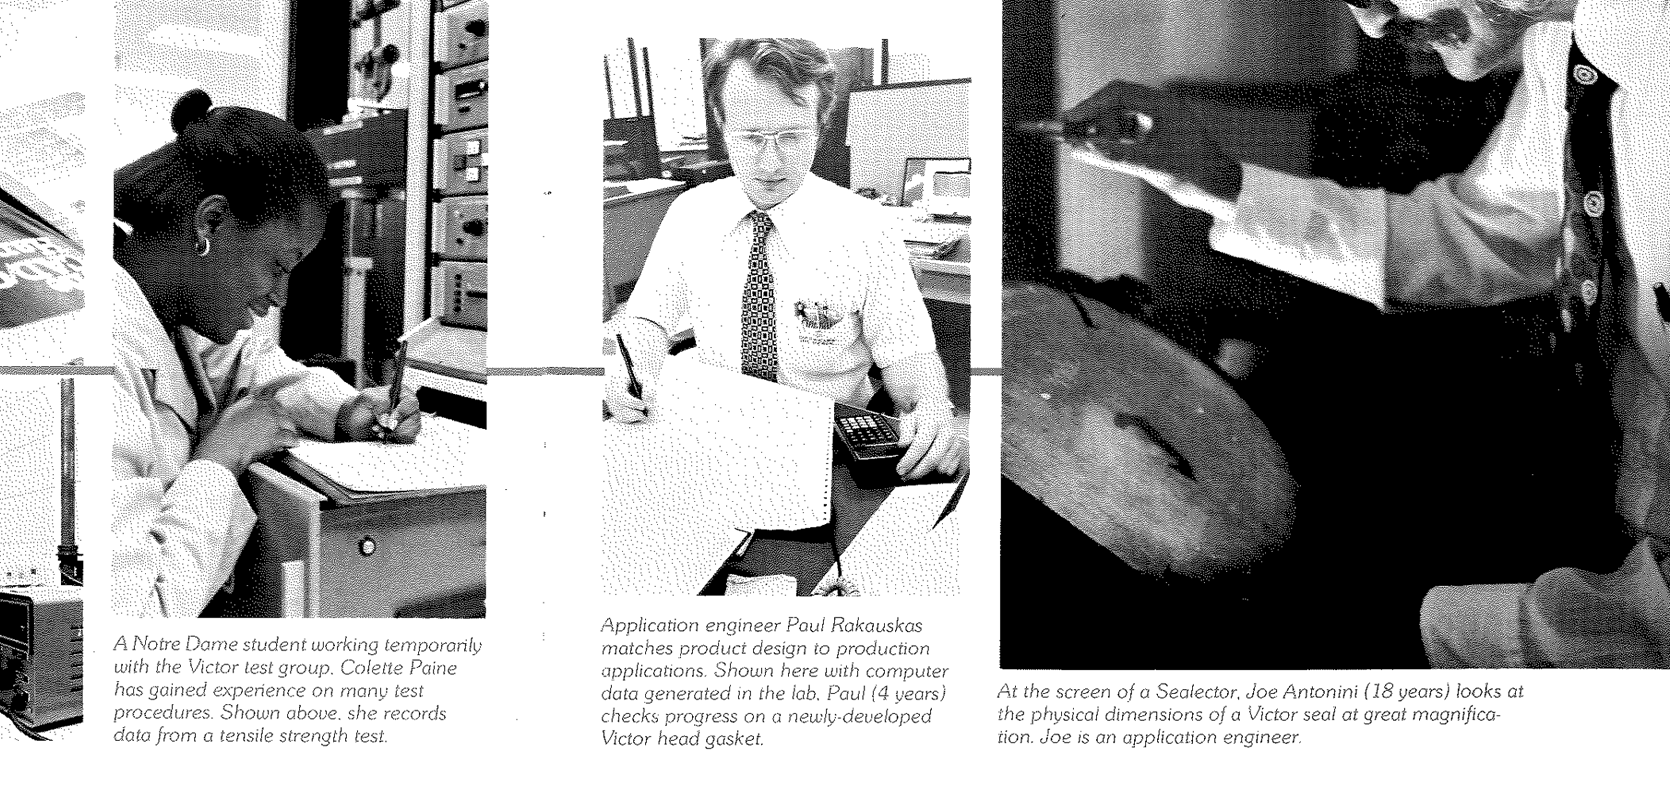 Rakauskas was featured in a 1981 brochure that depicted the various Dana Technical Centers, including the Victor Division Technical Center. 